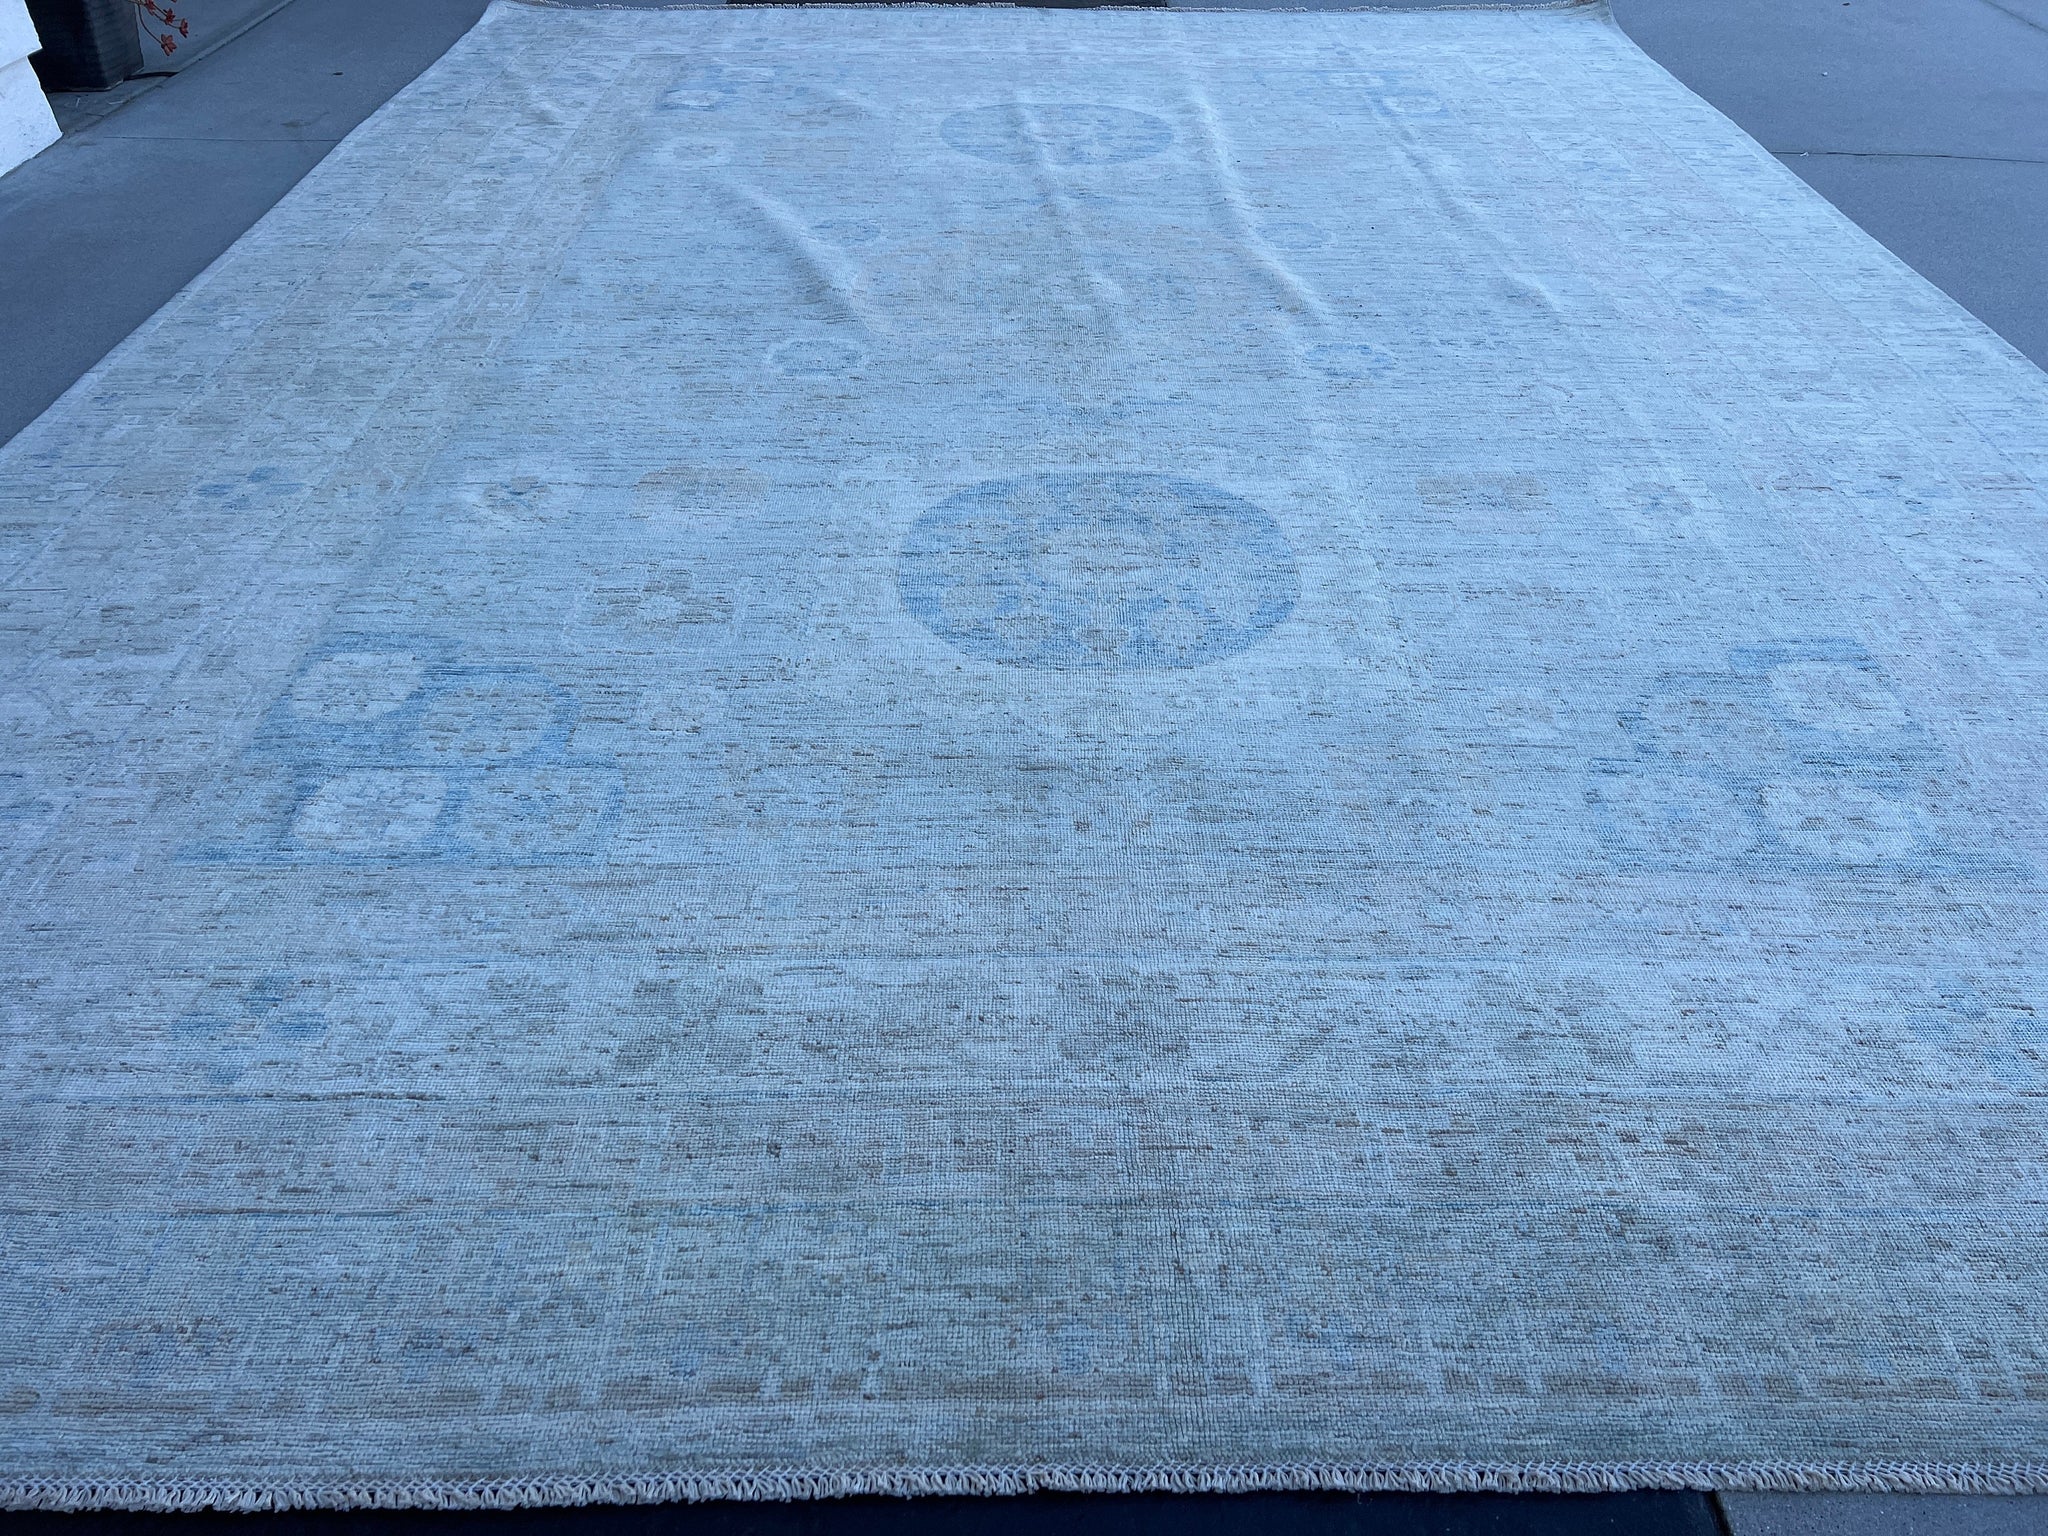 10x13 Handmade Afghan Rug | Muted Blue Grey Beige Ivory | Khotan Wool Oriental Traditional Transitional Knotted Luxury Turkish Persian Boho